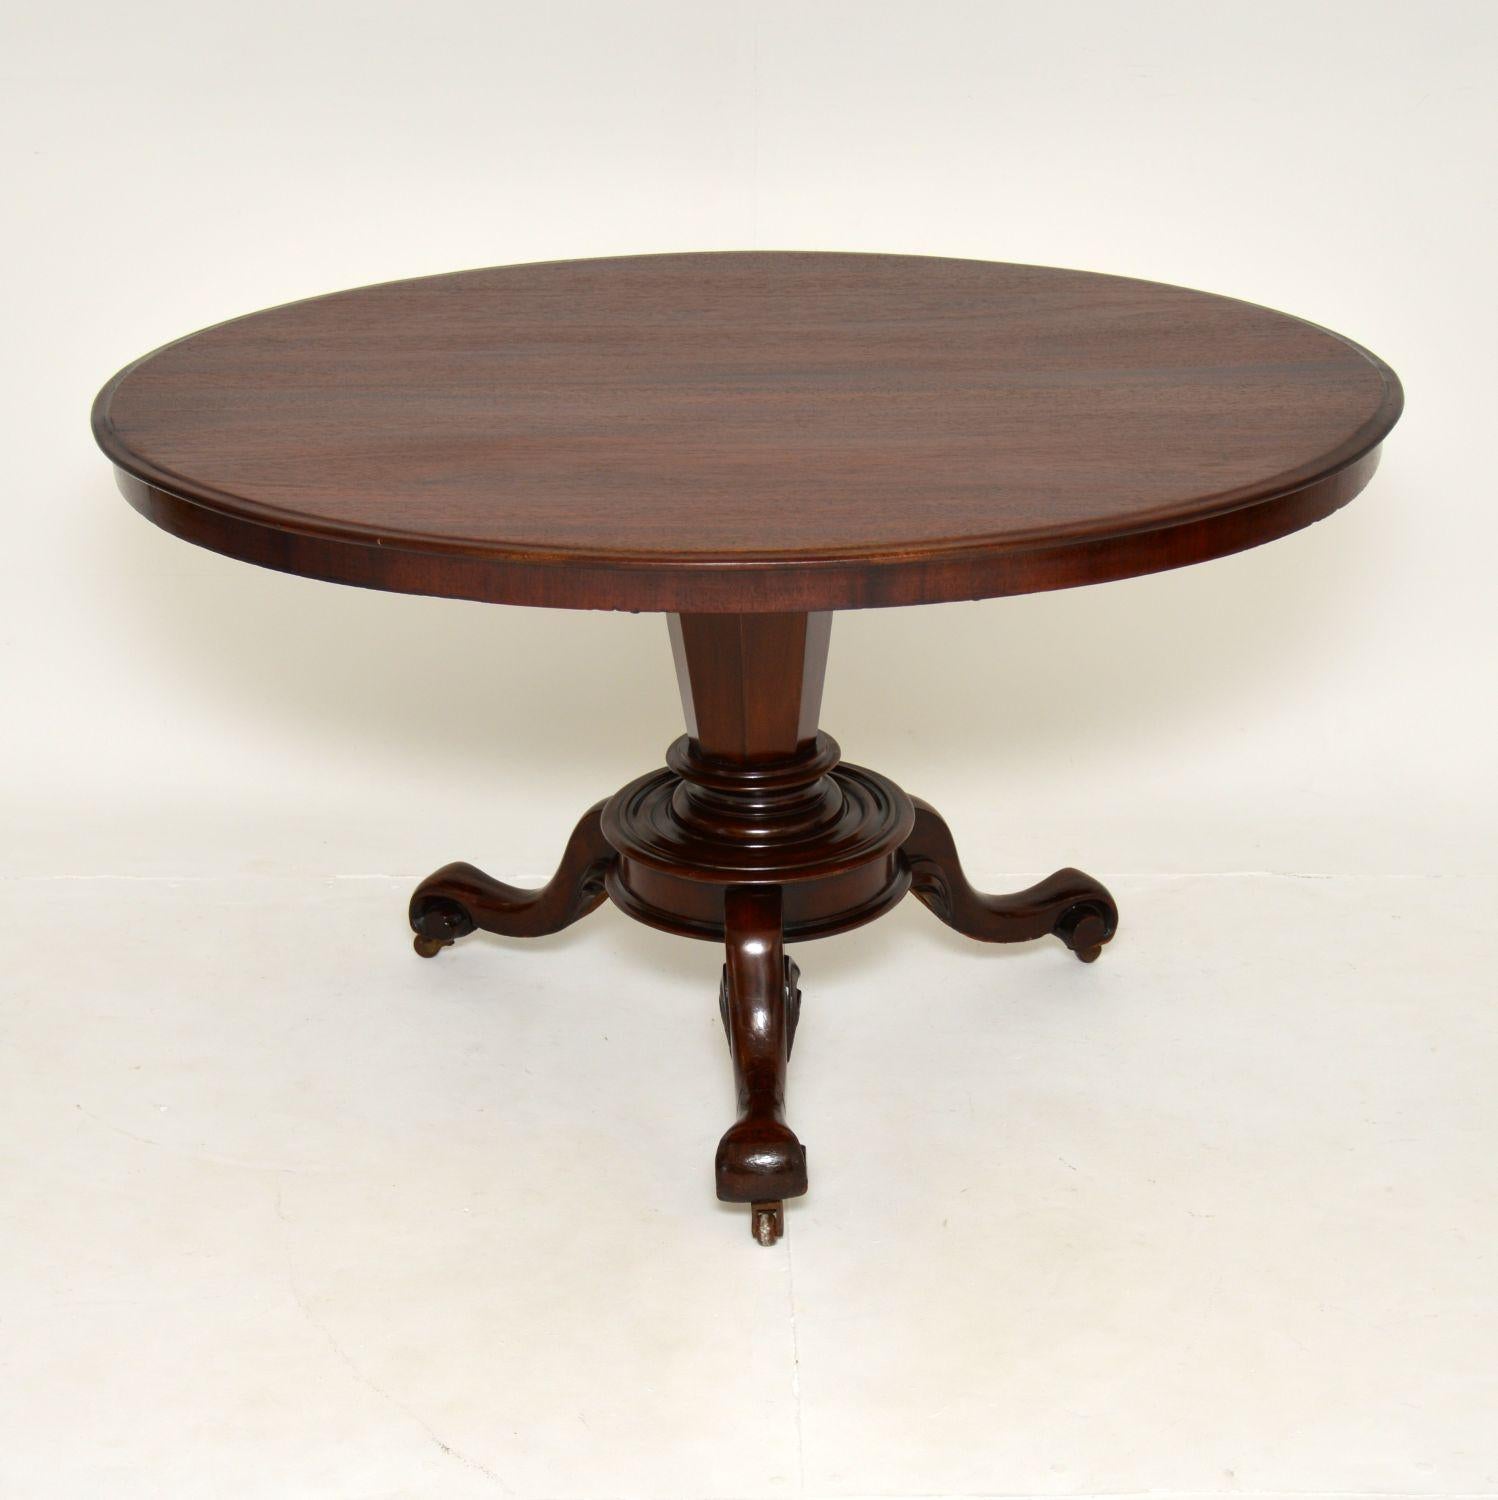 A beautiful and unusual antique early Victorian period tilt top table. This was made in England, it dates from around the 1840-1860’s.

It has a lovely solid woo oval top and sits on a finely carved tripod base with a central octagonal column.